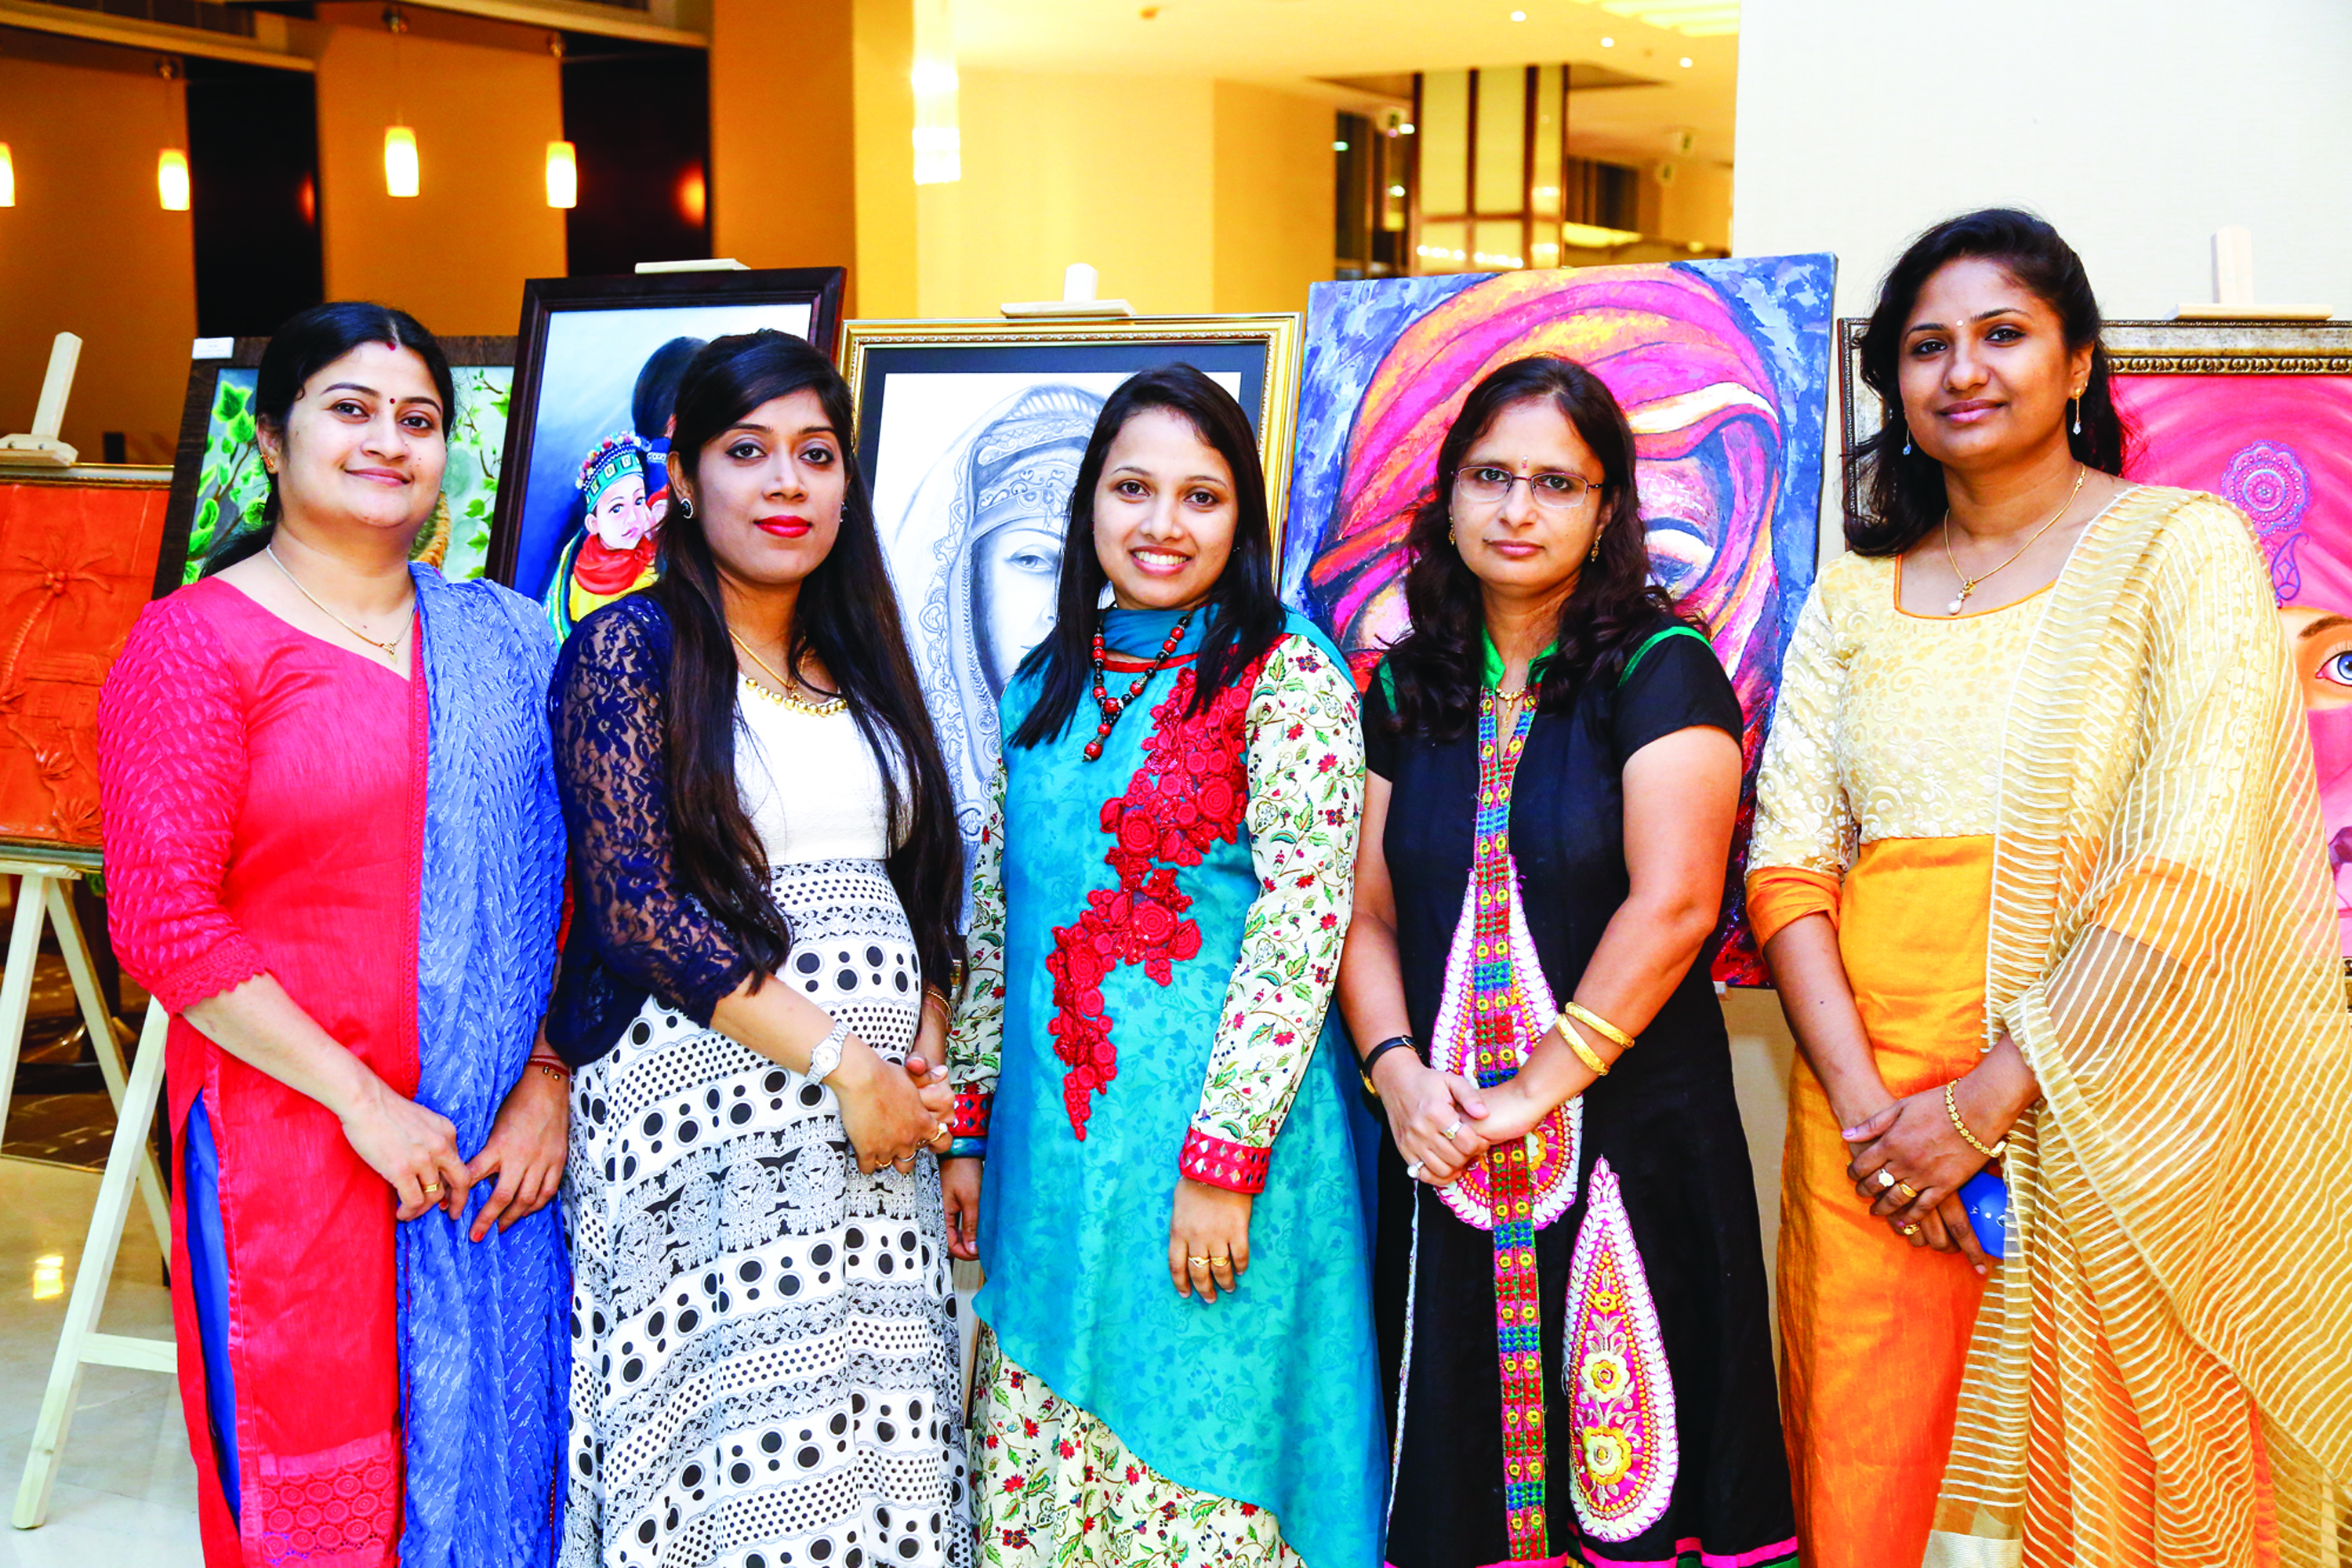 Painting Exhibition by five women artists in Muscat